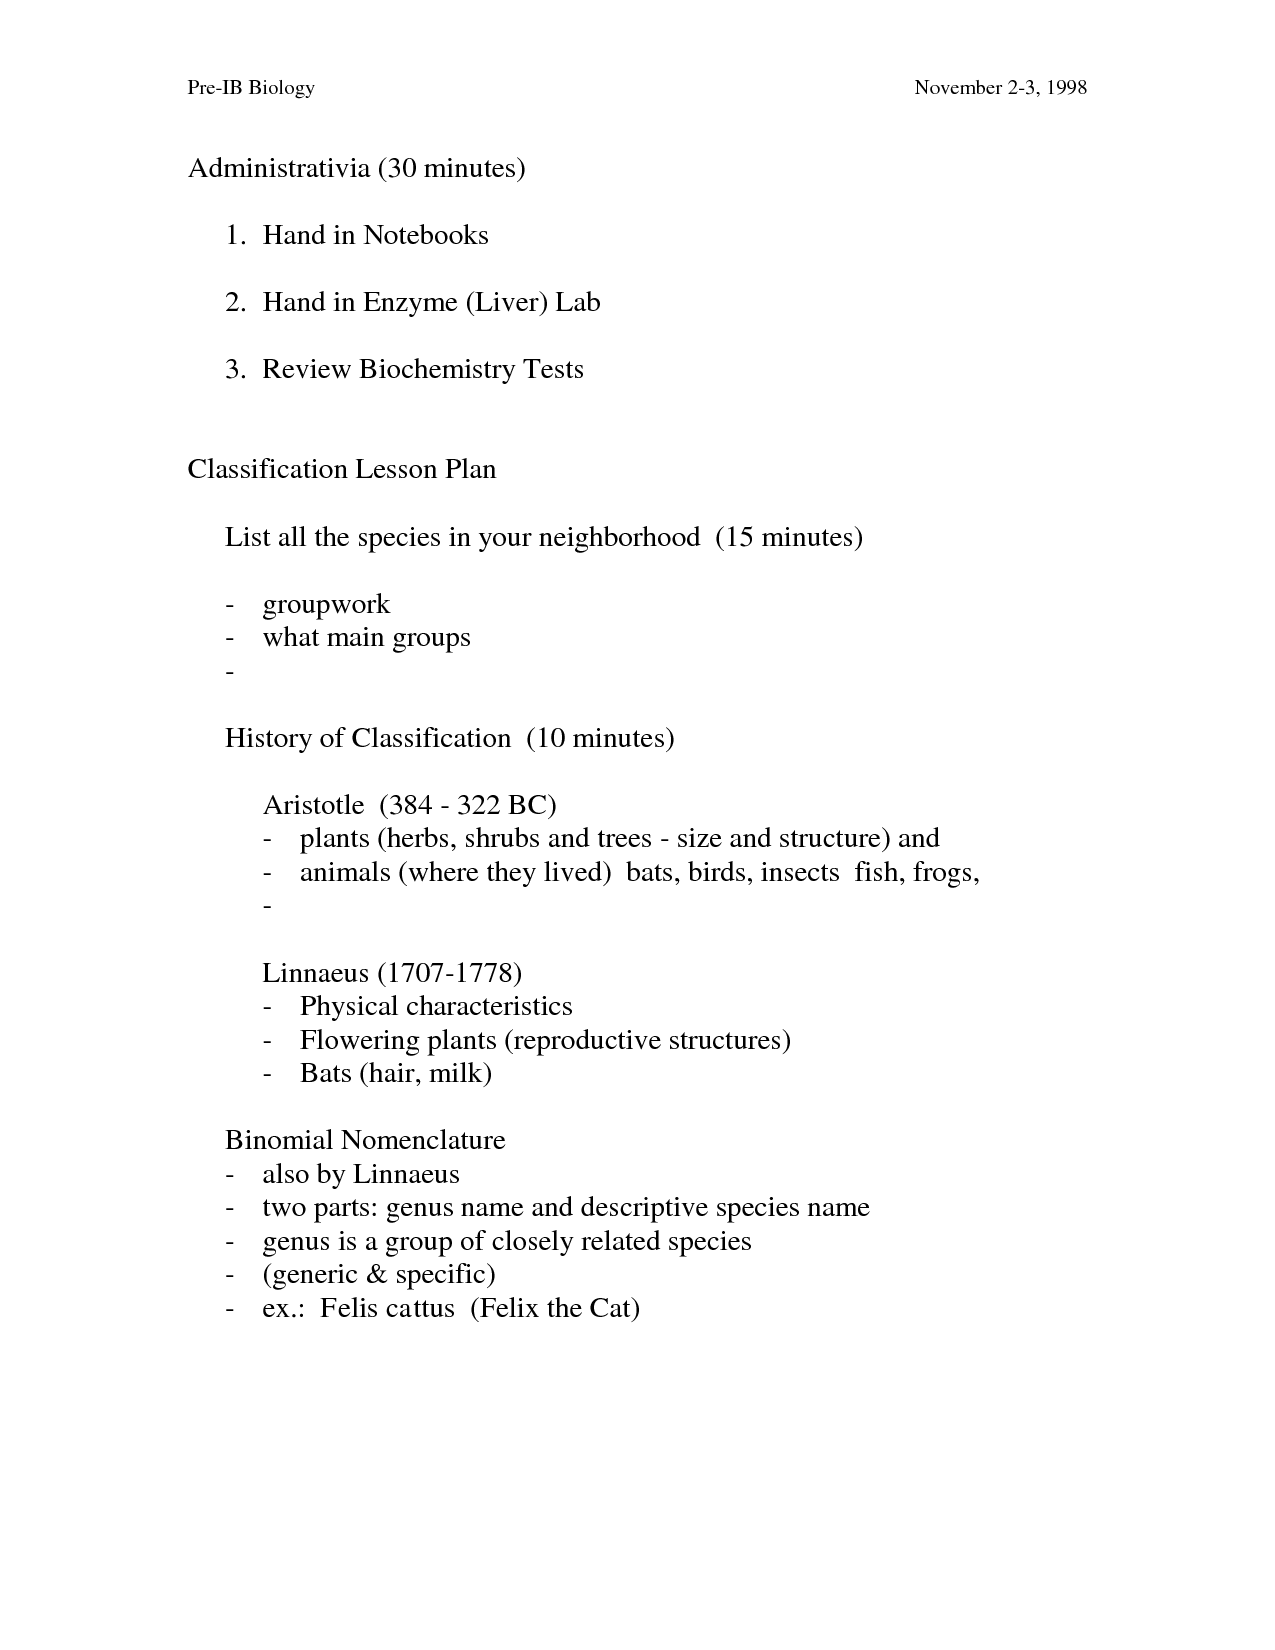 Classification Worksheet and Answer Key Image